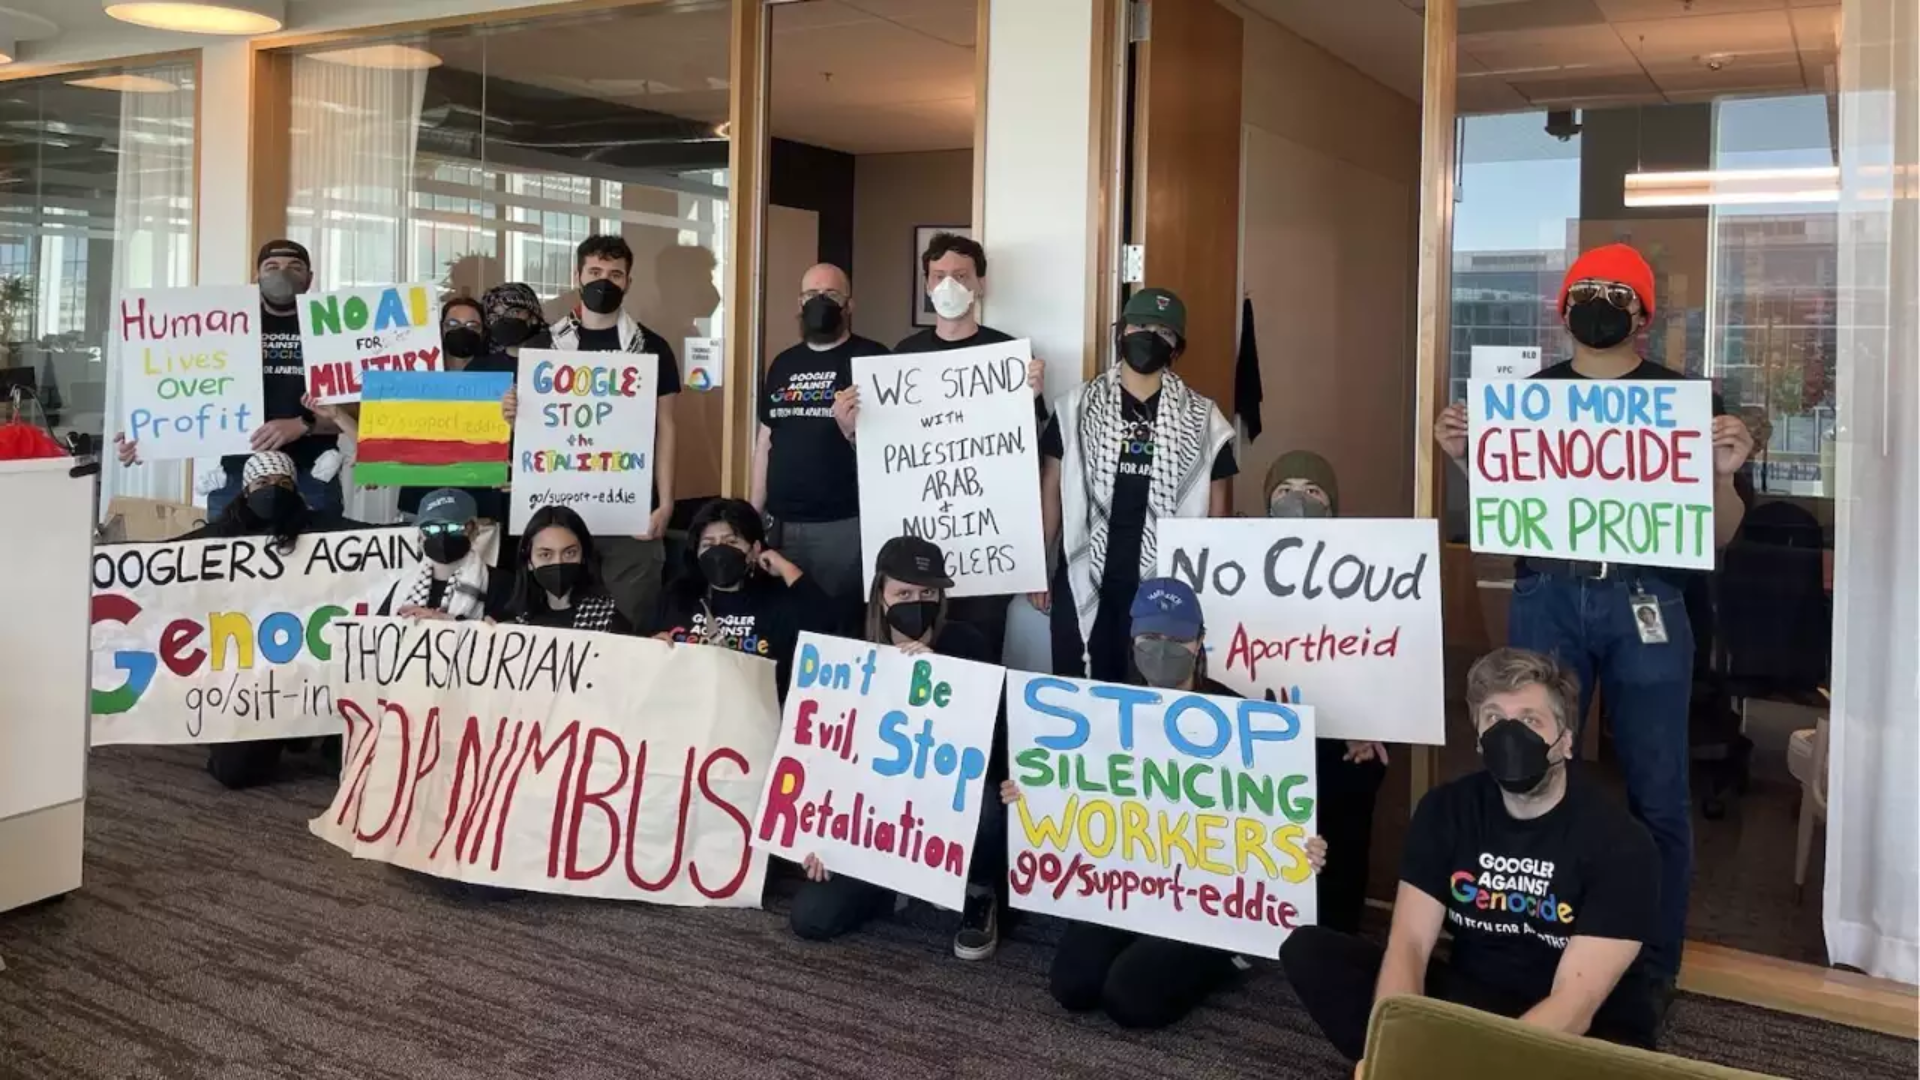 Google Faces Backlash Over Employee Layoffs Amid Protests Against Project Nimbus